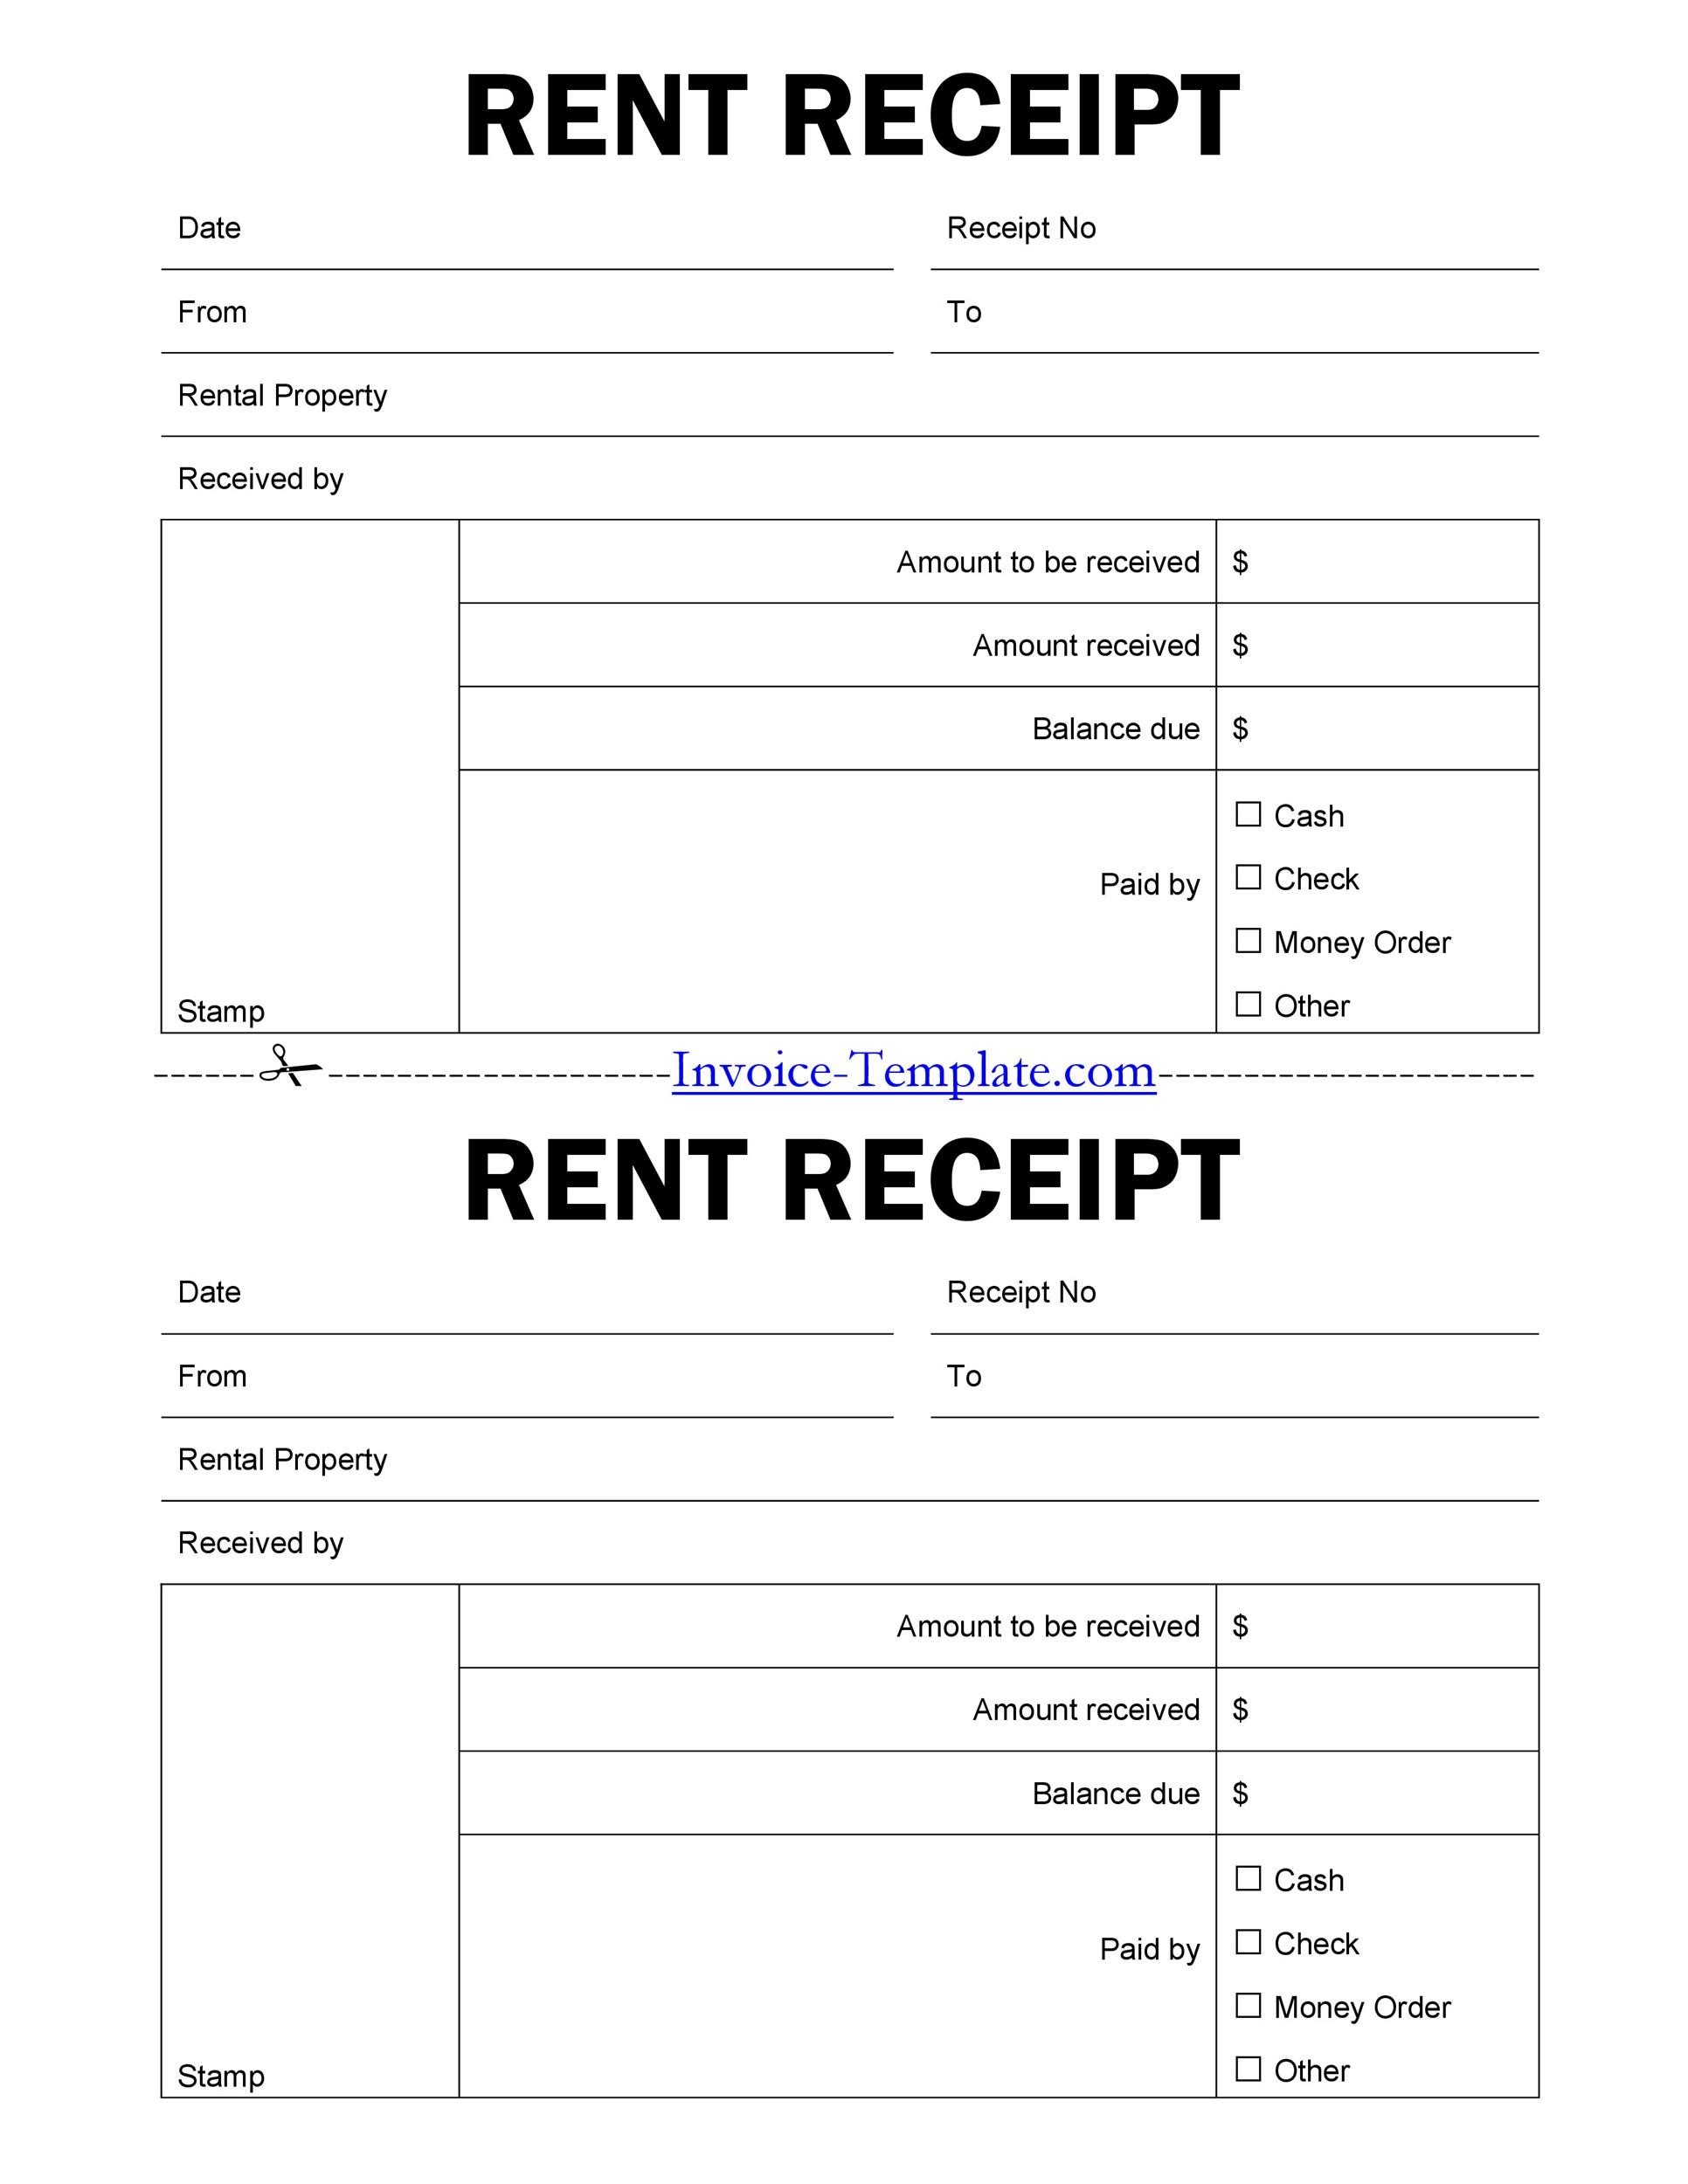 rental-receipt-template-30-free-word-excel-pdf-documents-download-free-premium-templates